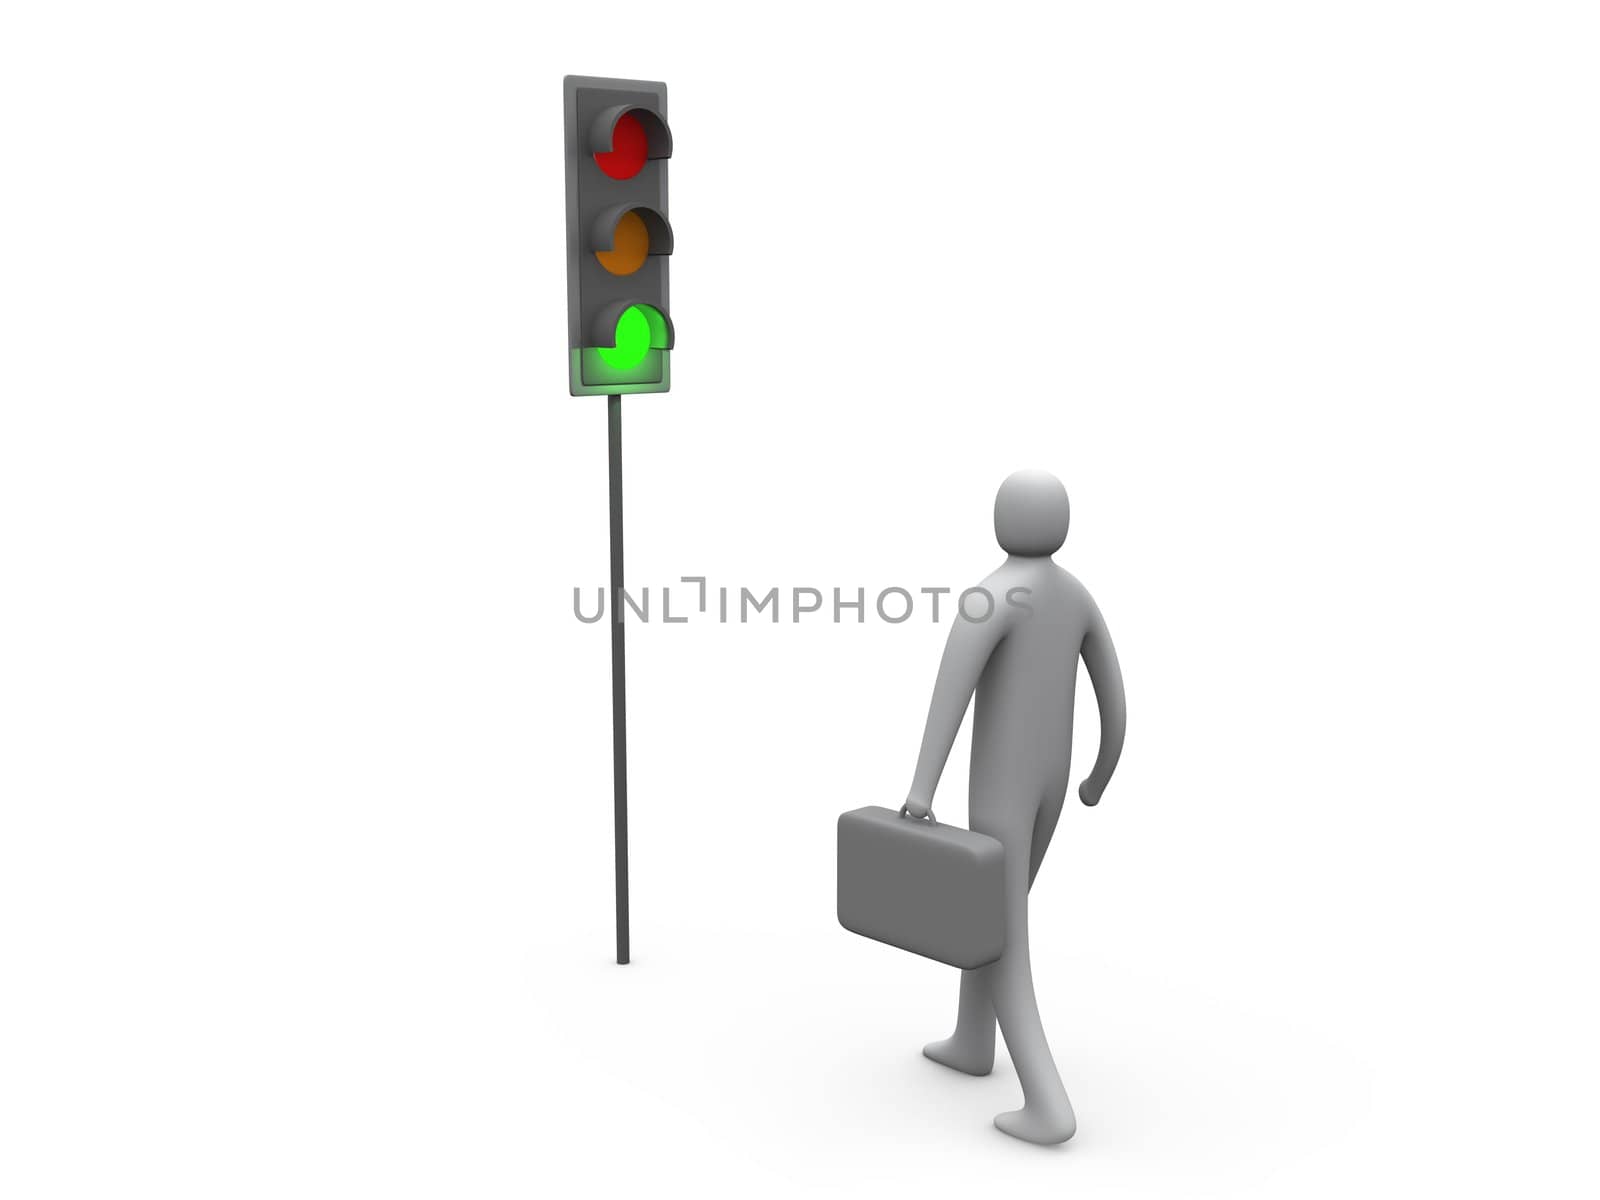 Traffic Light - Business Activity Started by 3pod